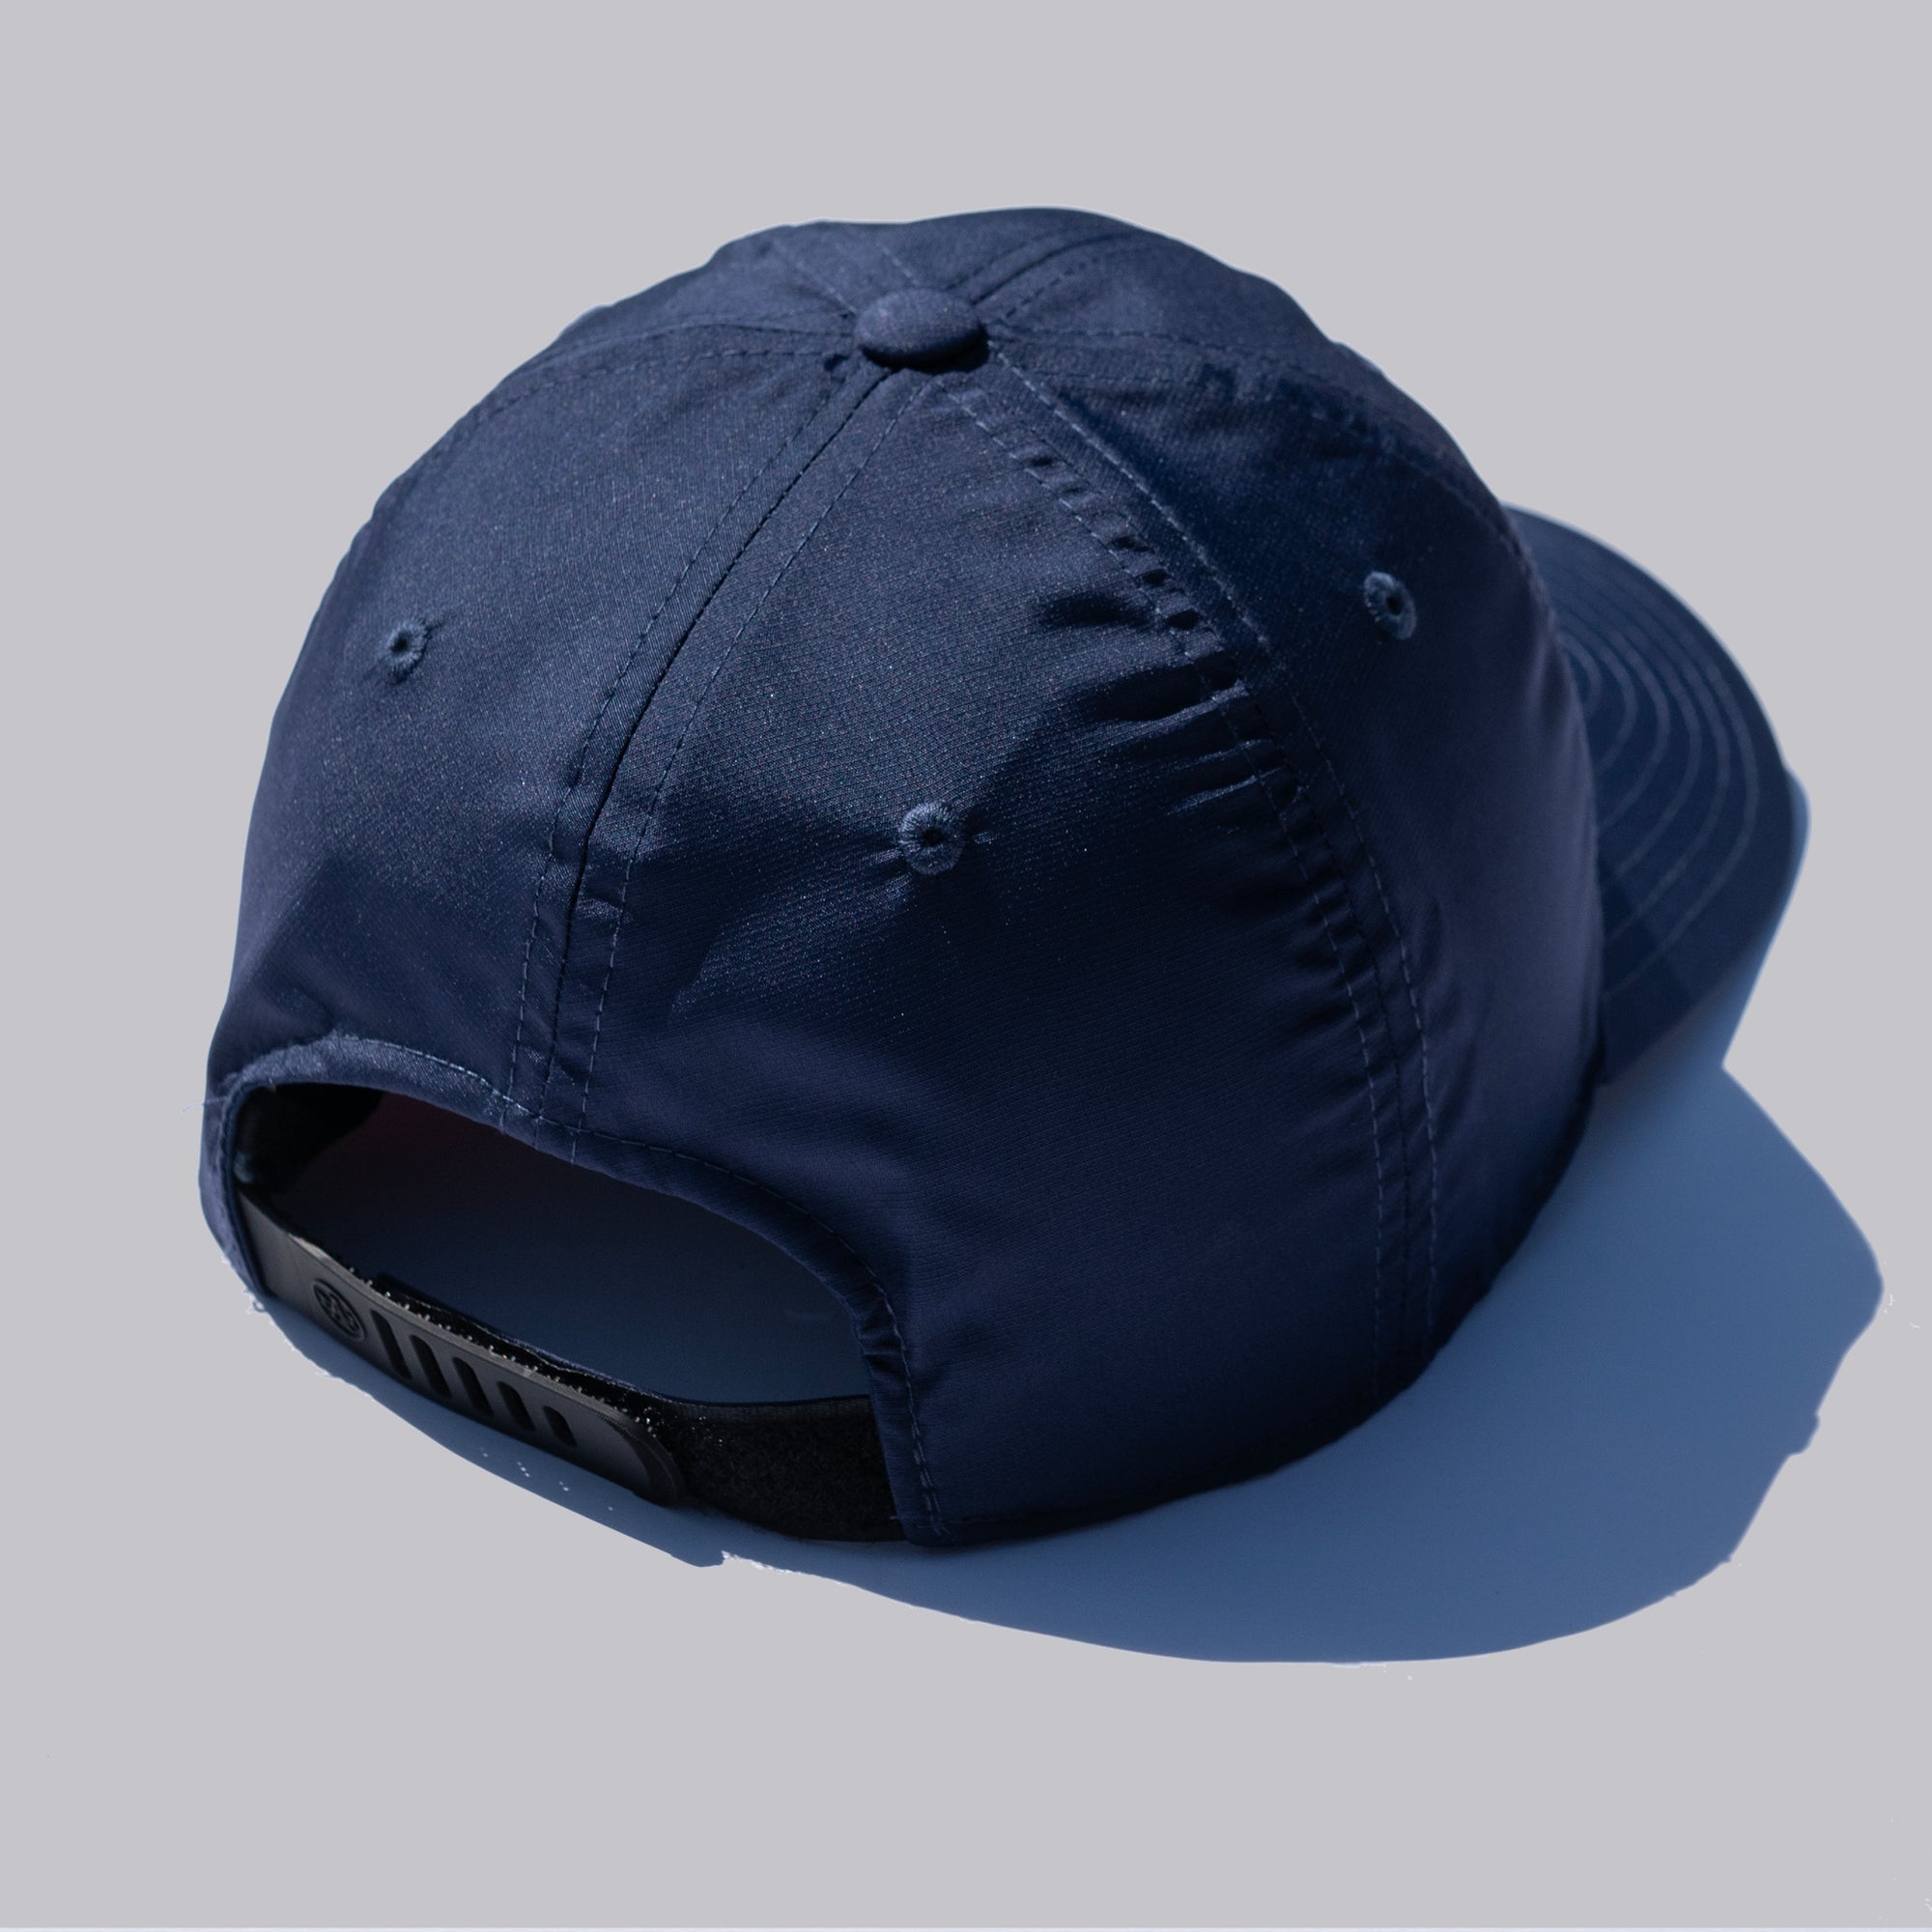 Fried Egg Golf & American Needle Performance Hat - Navy